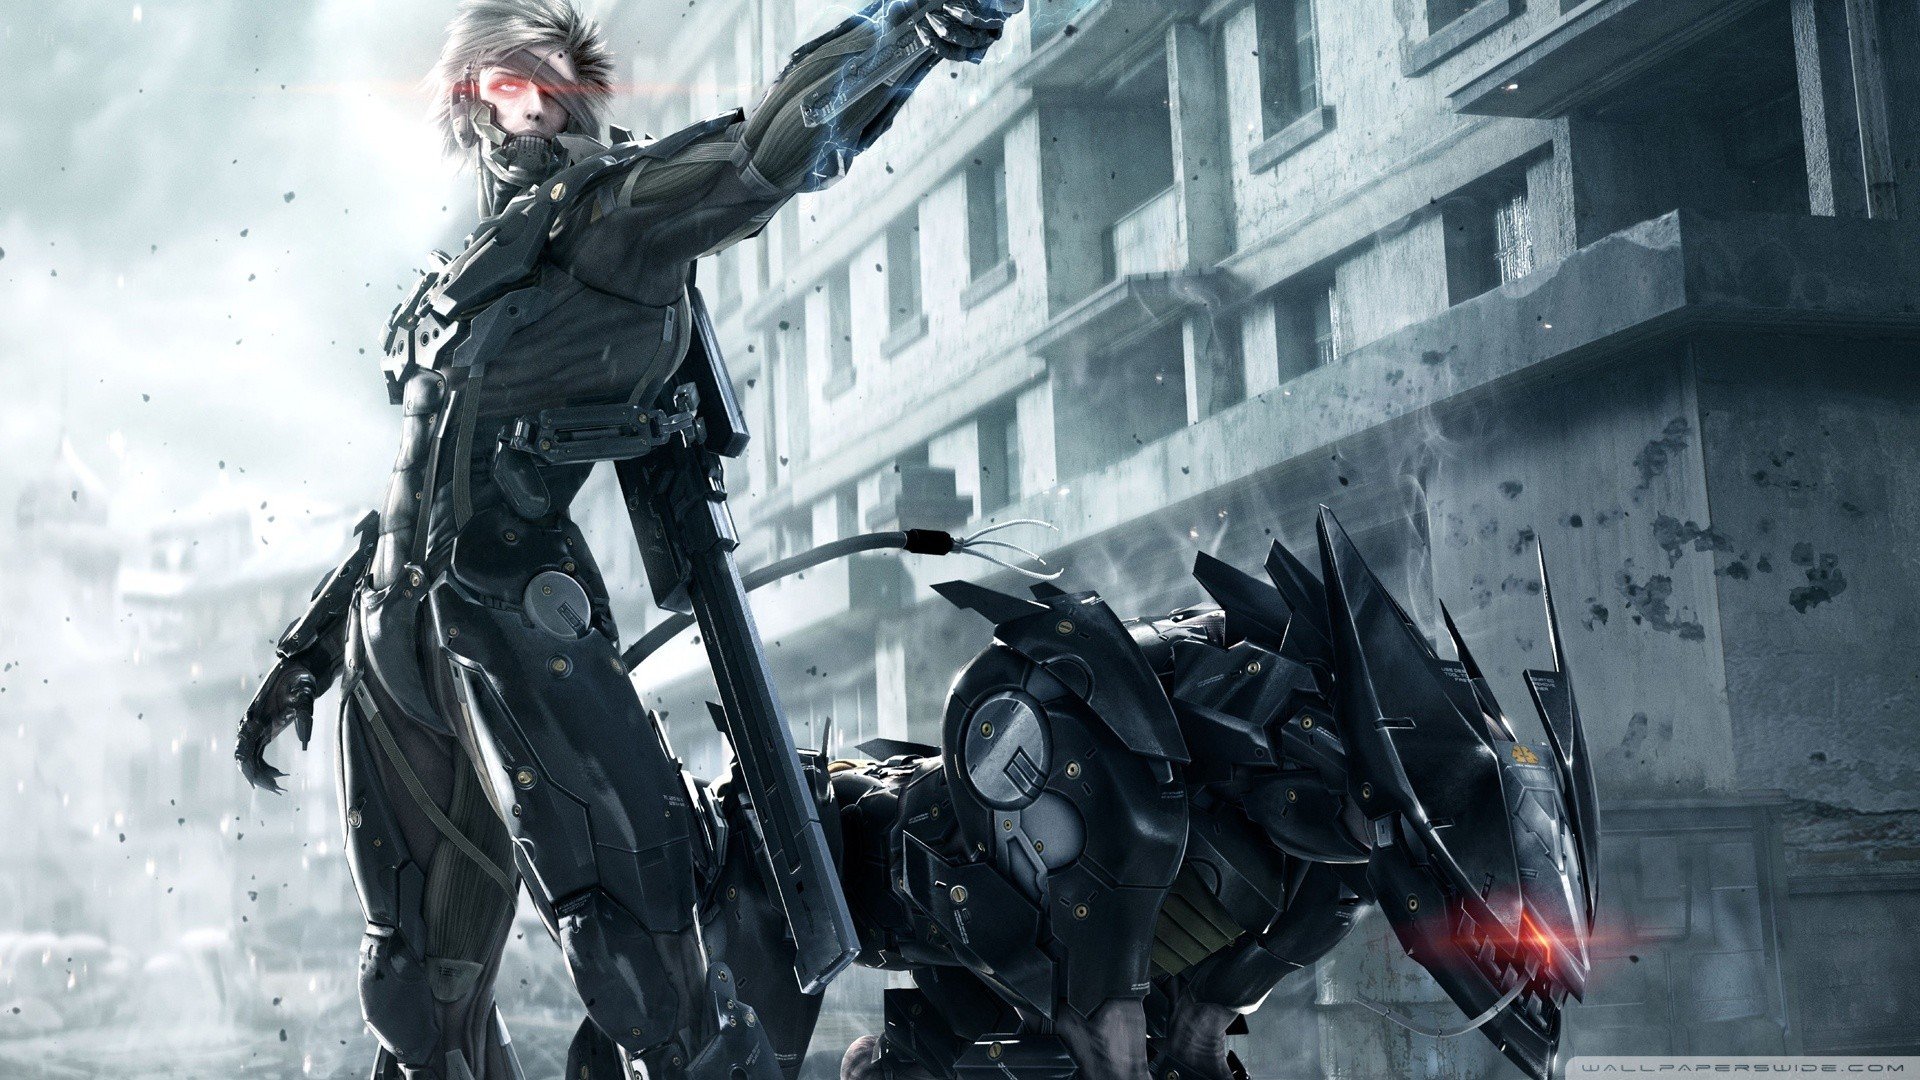 Awesome Metal Gear Rising: Revengeance (MGR) free wallpaper ID:130573 for hd 1080p computer